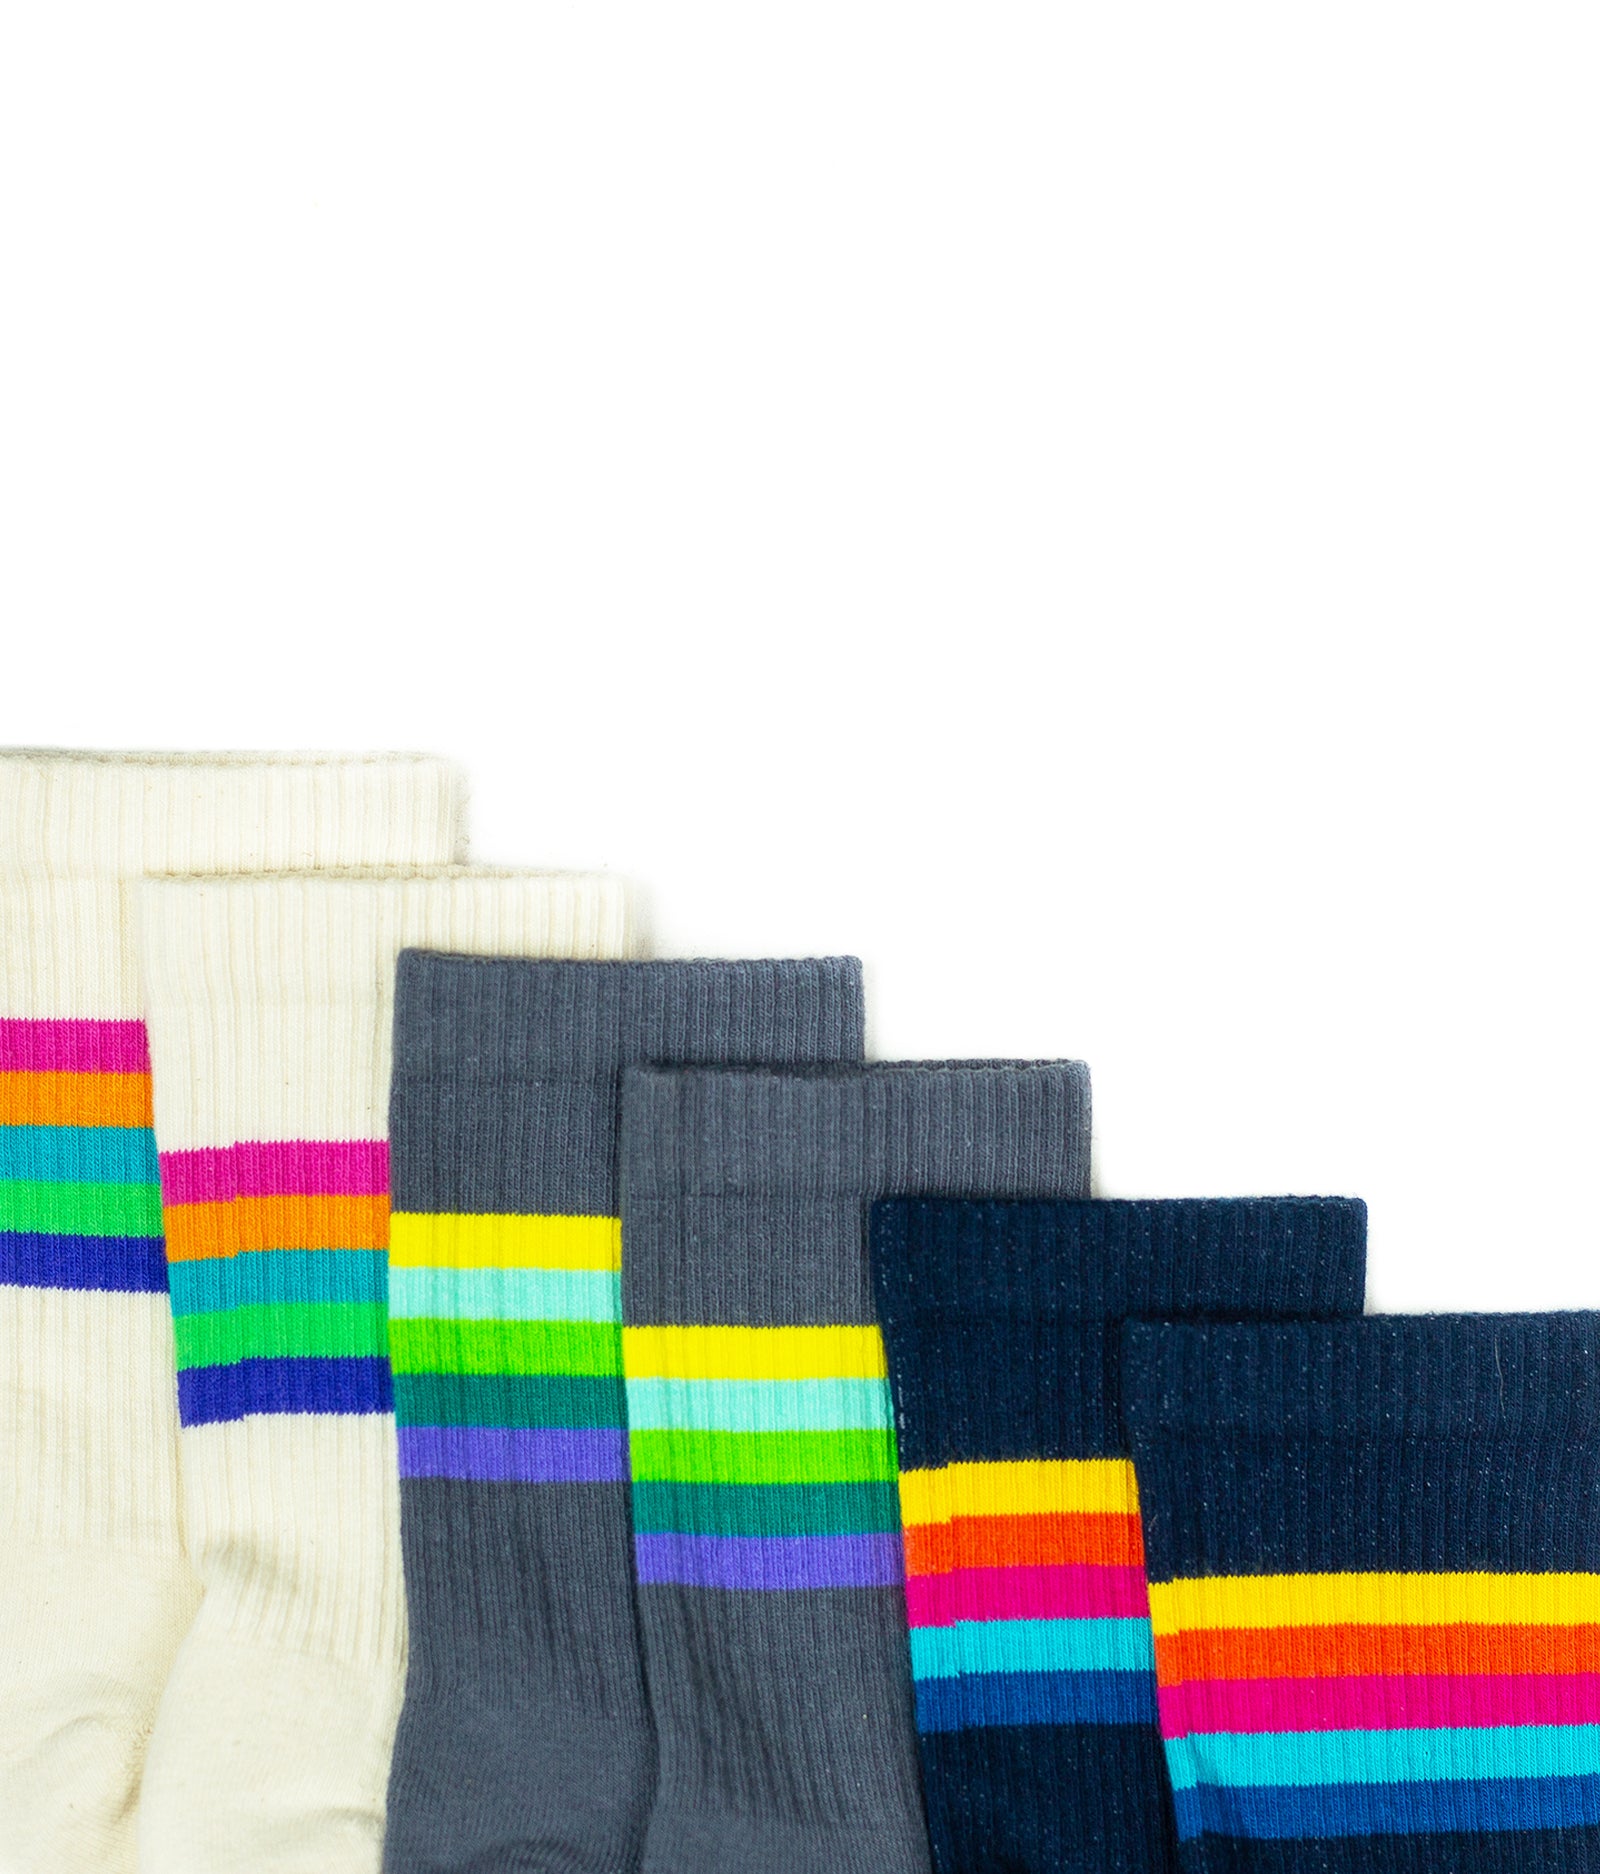 A layered collection of The Allen style sock in 3 color variations. From left to right: Natural, Concrete, Navy.